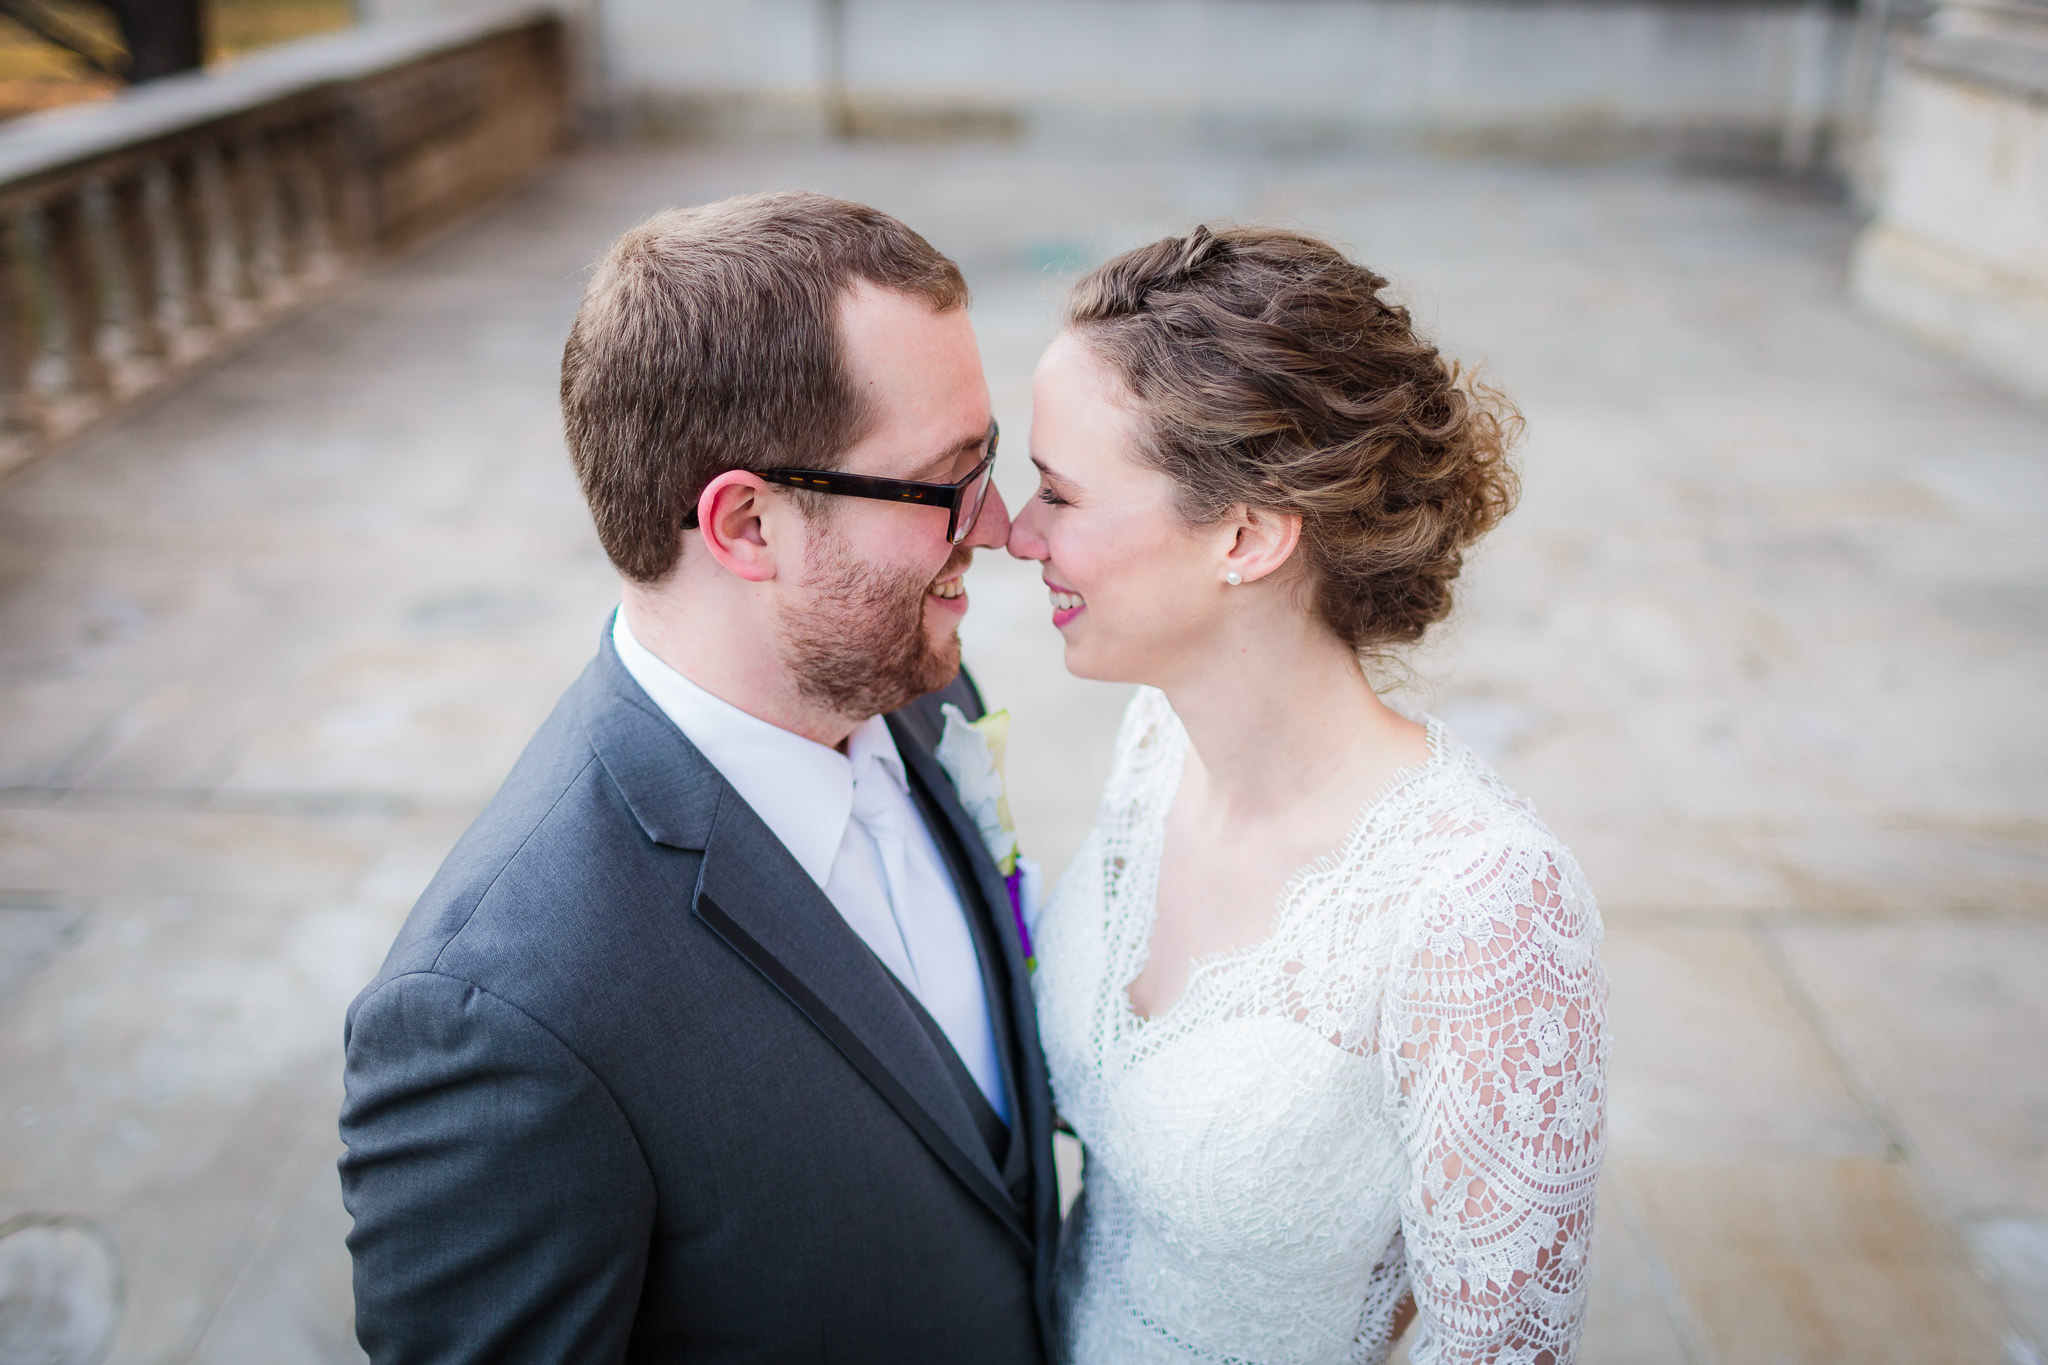 Newlyweds give eskimo kisses on the patio of the Cathedral of Learning